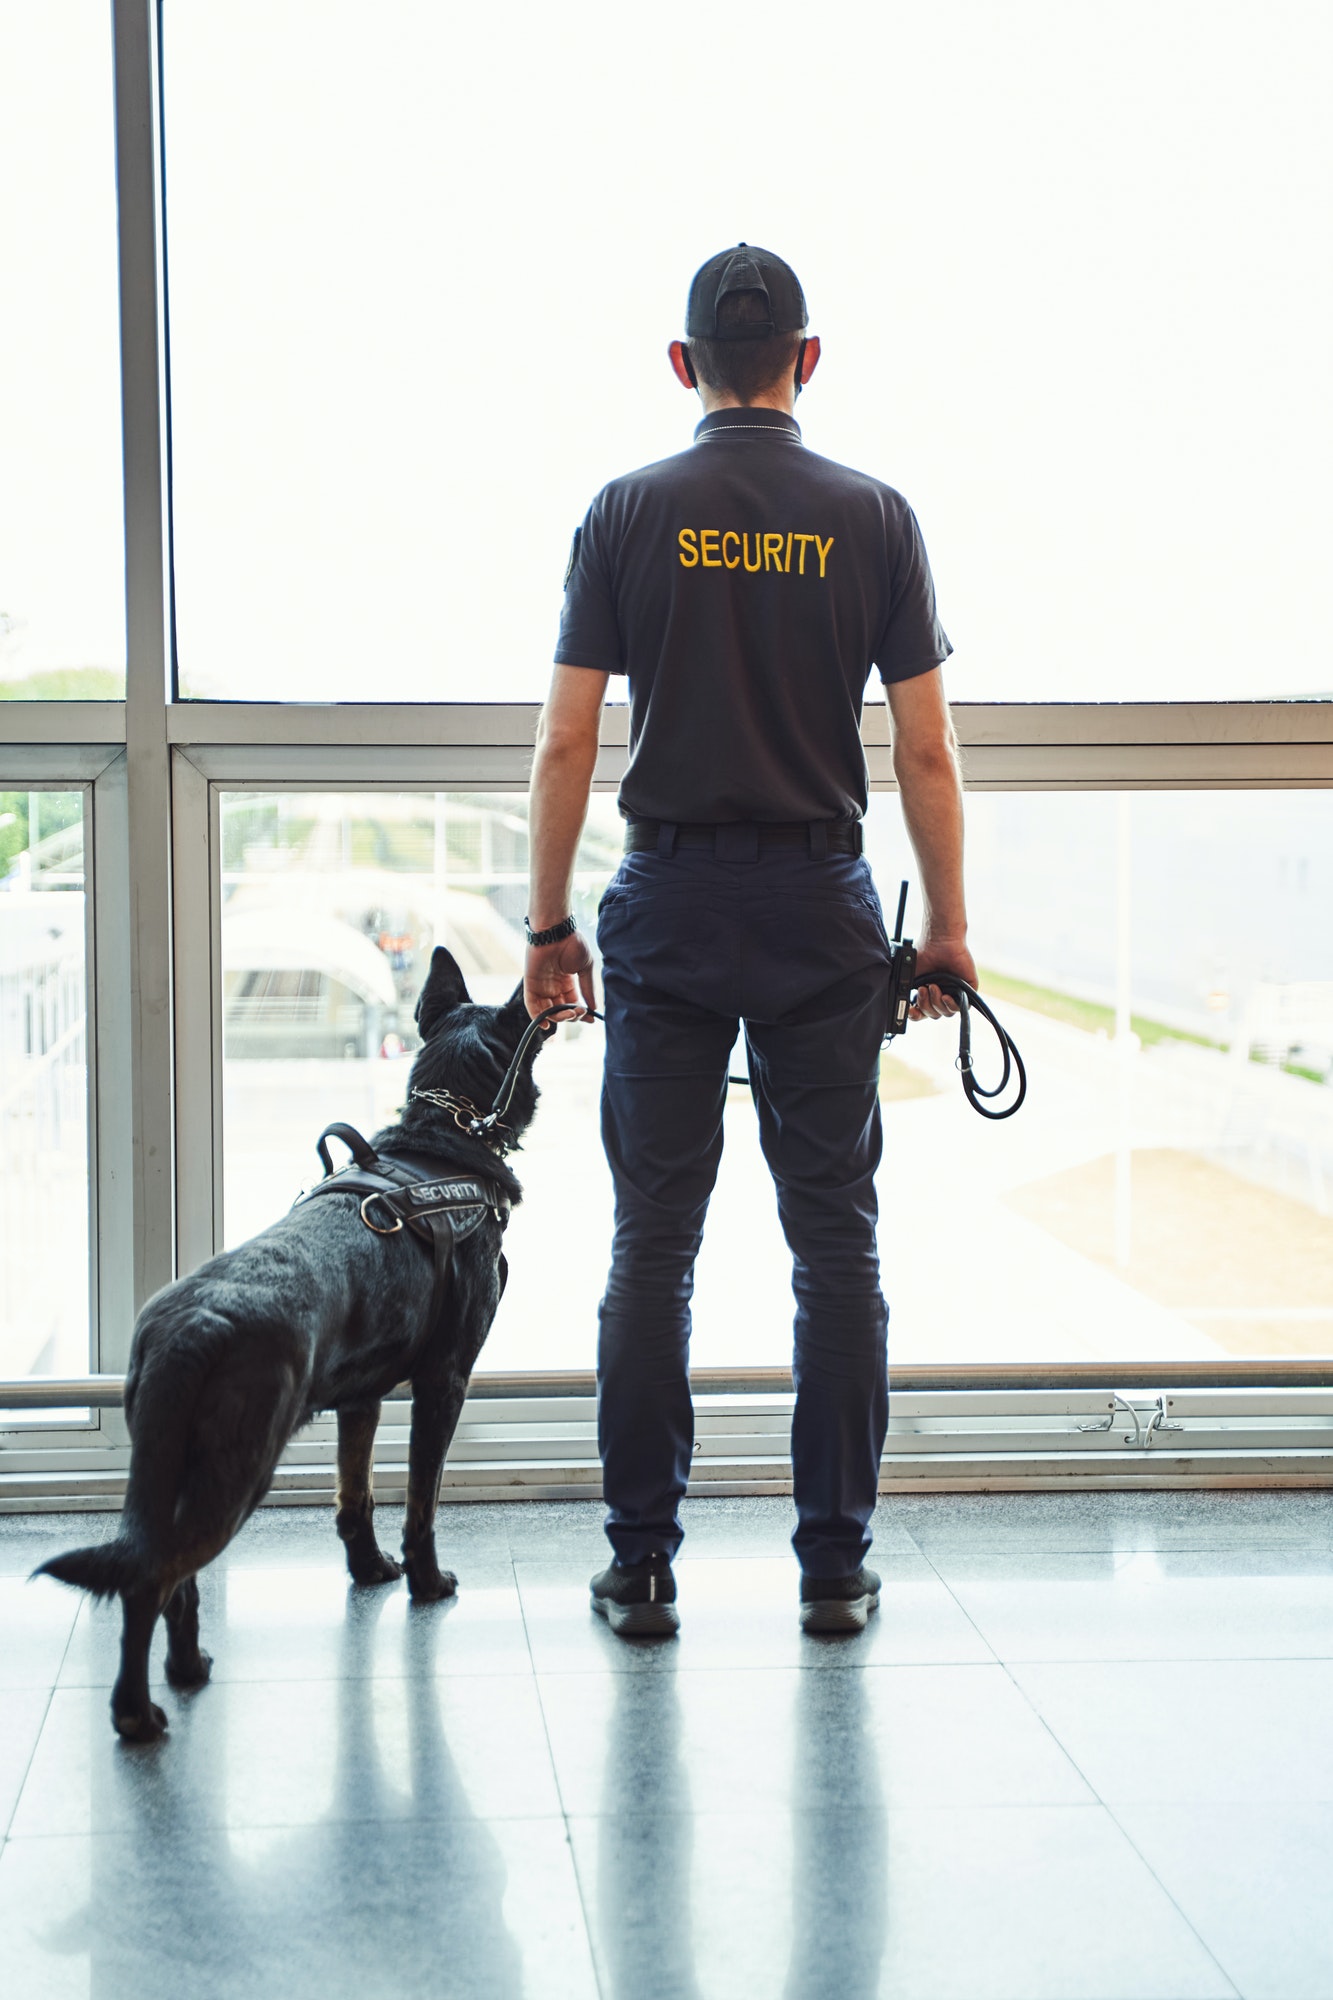 security worker with detection dog standing at airport terminal